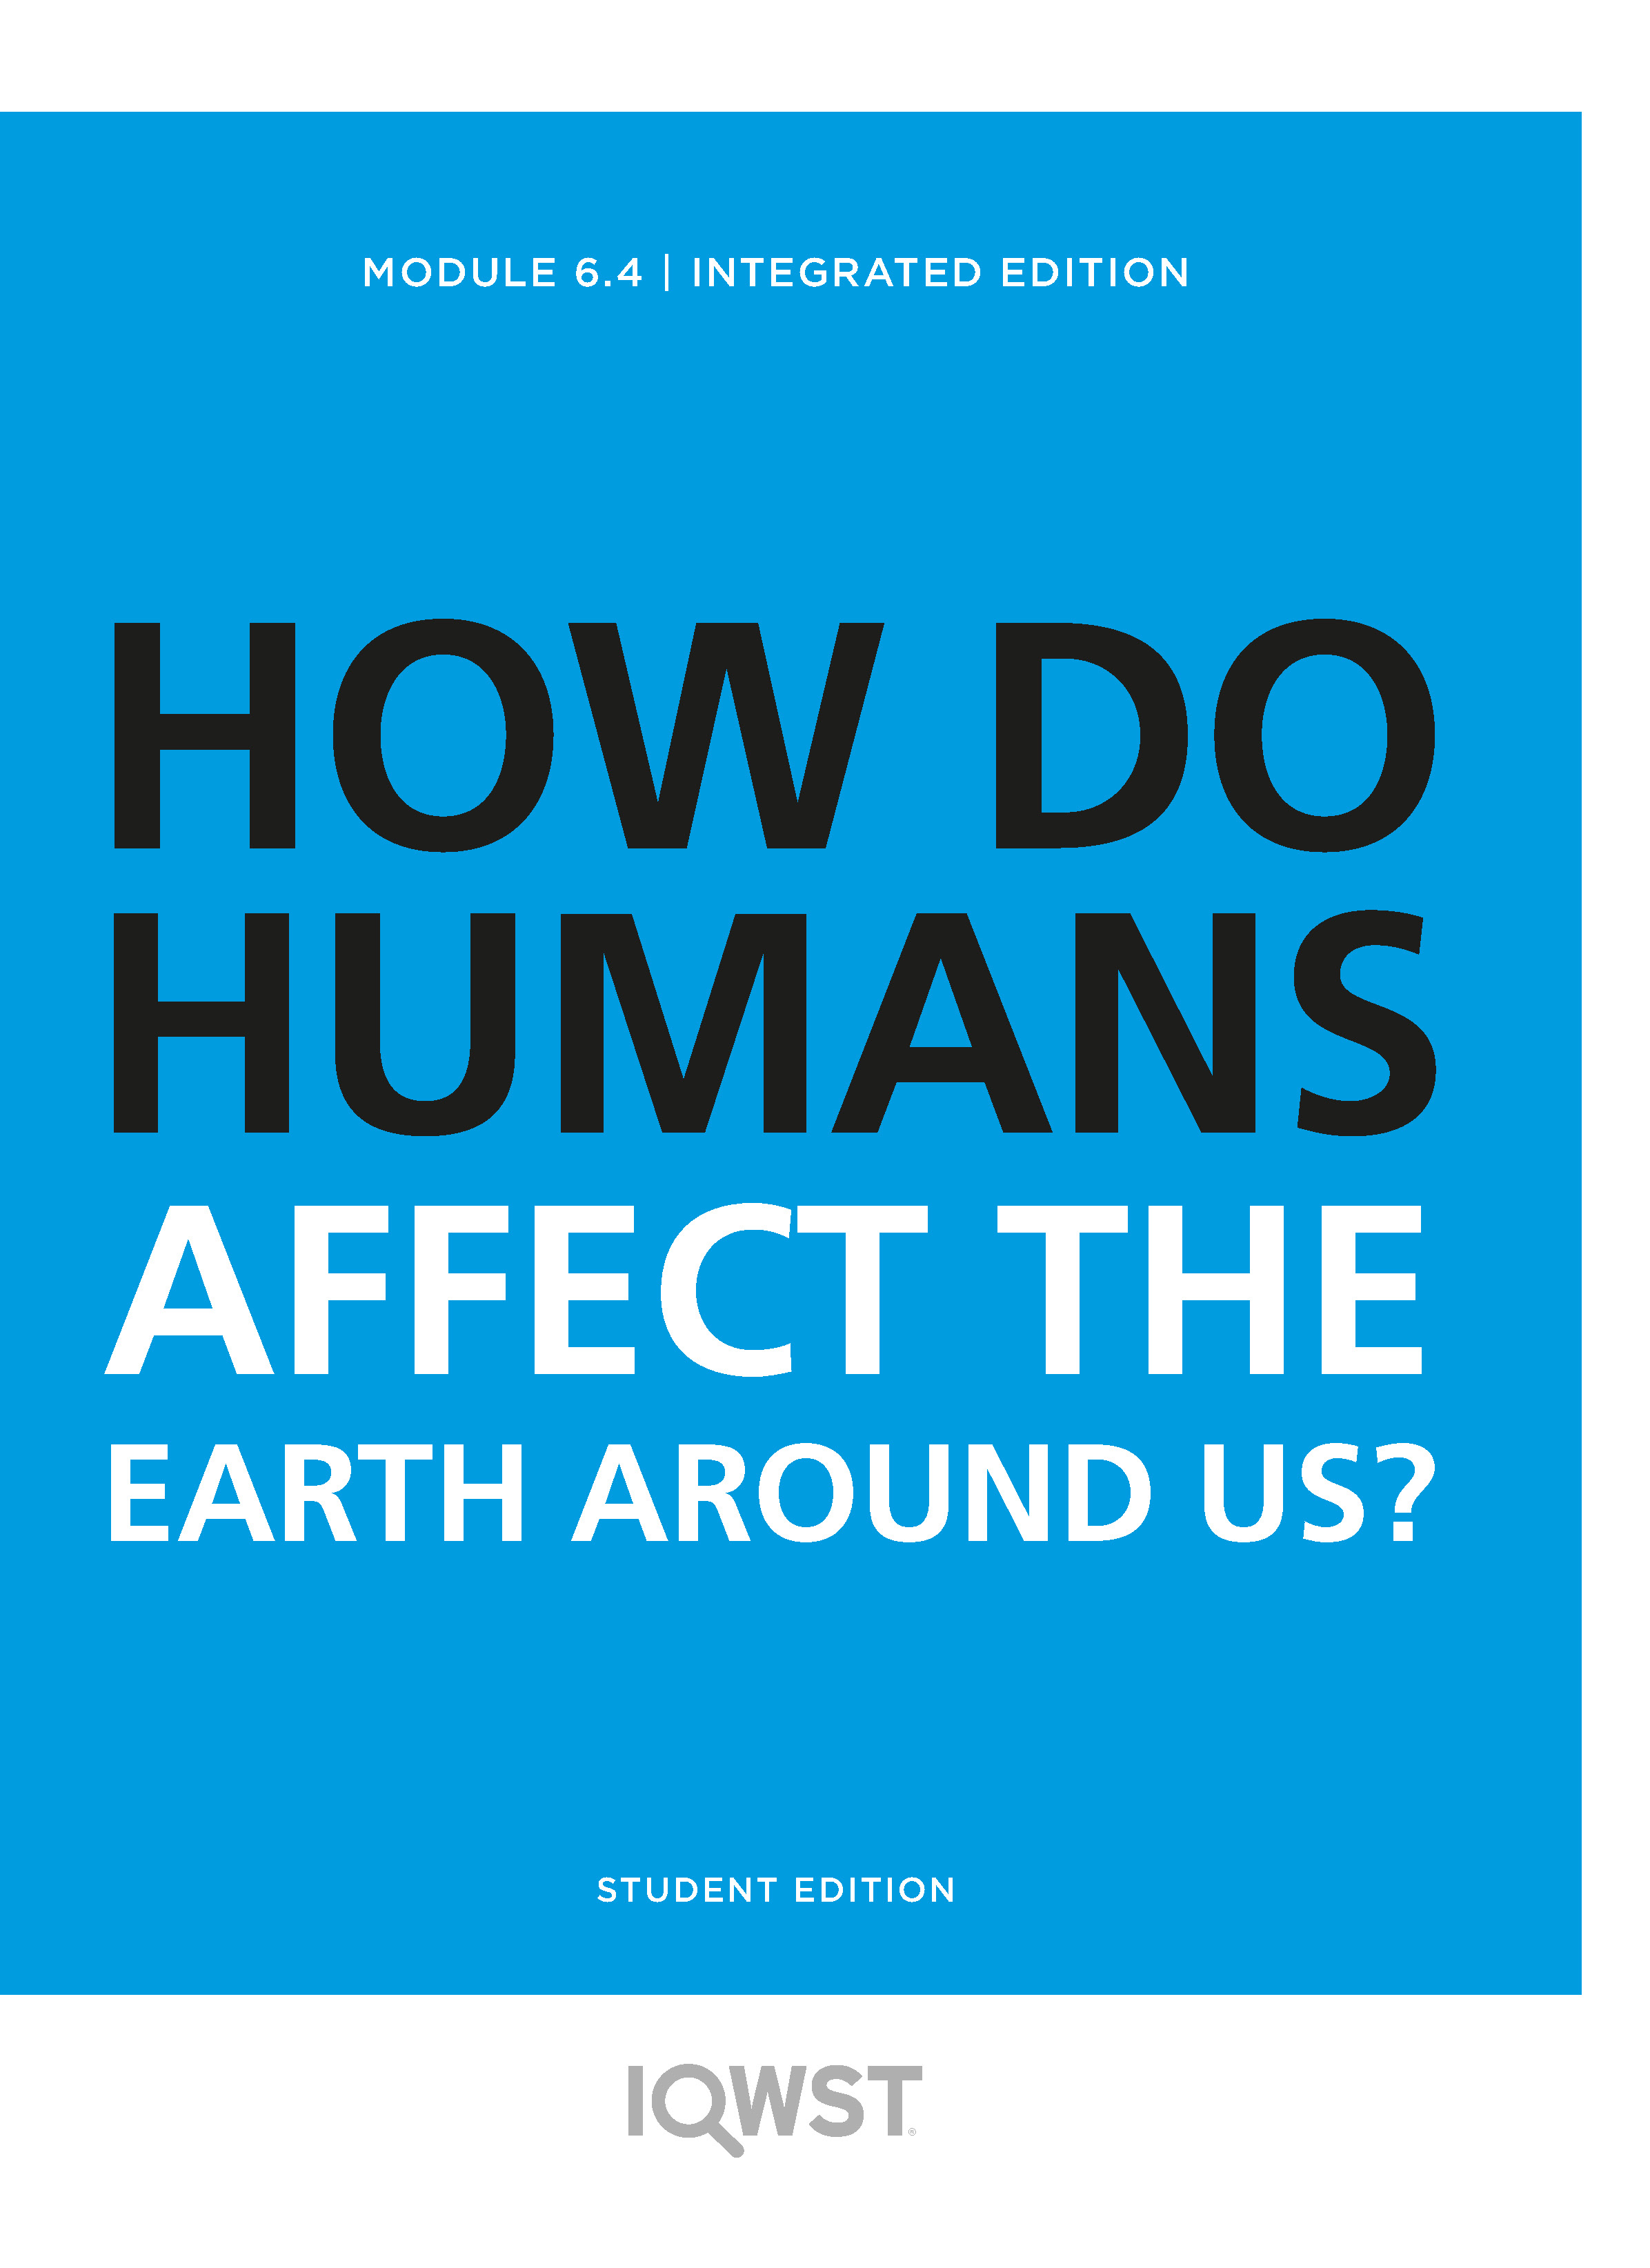 6.4 How Do Humans Affect the Earth Around Us?